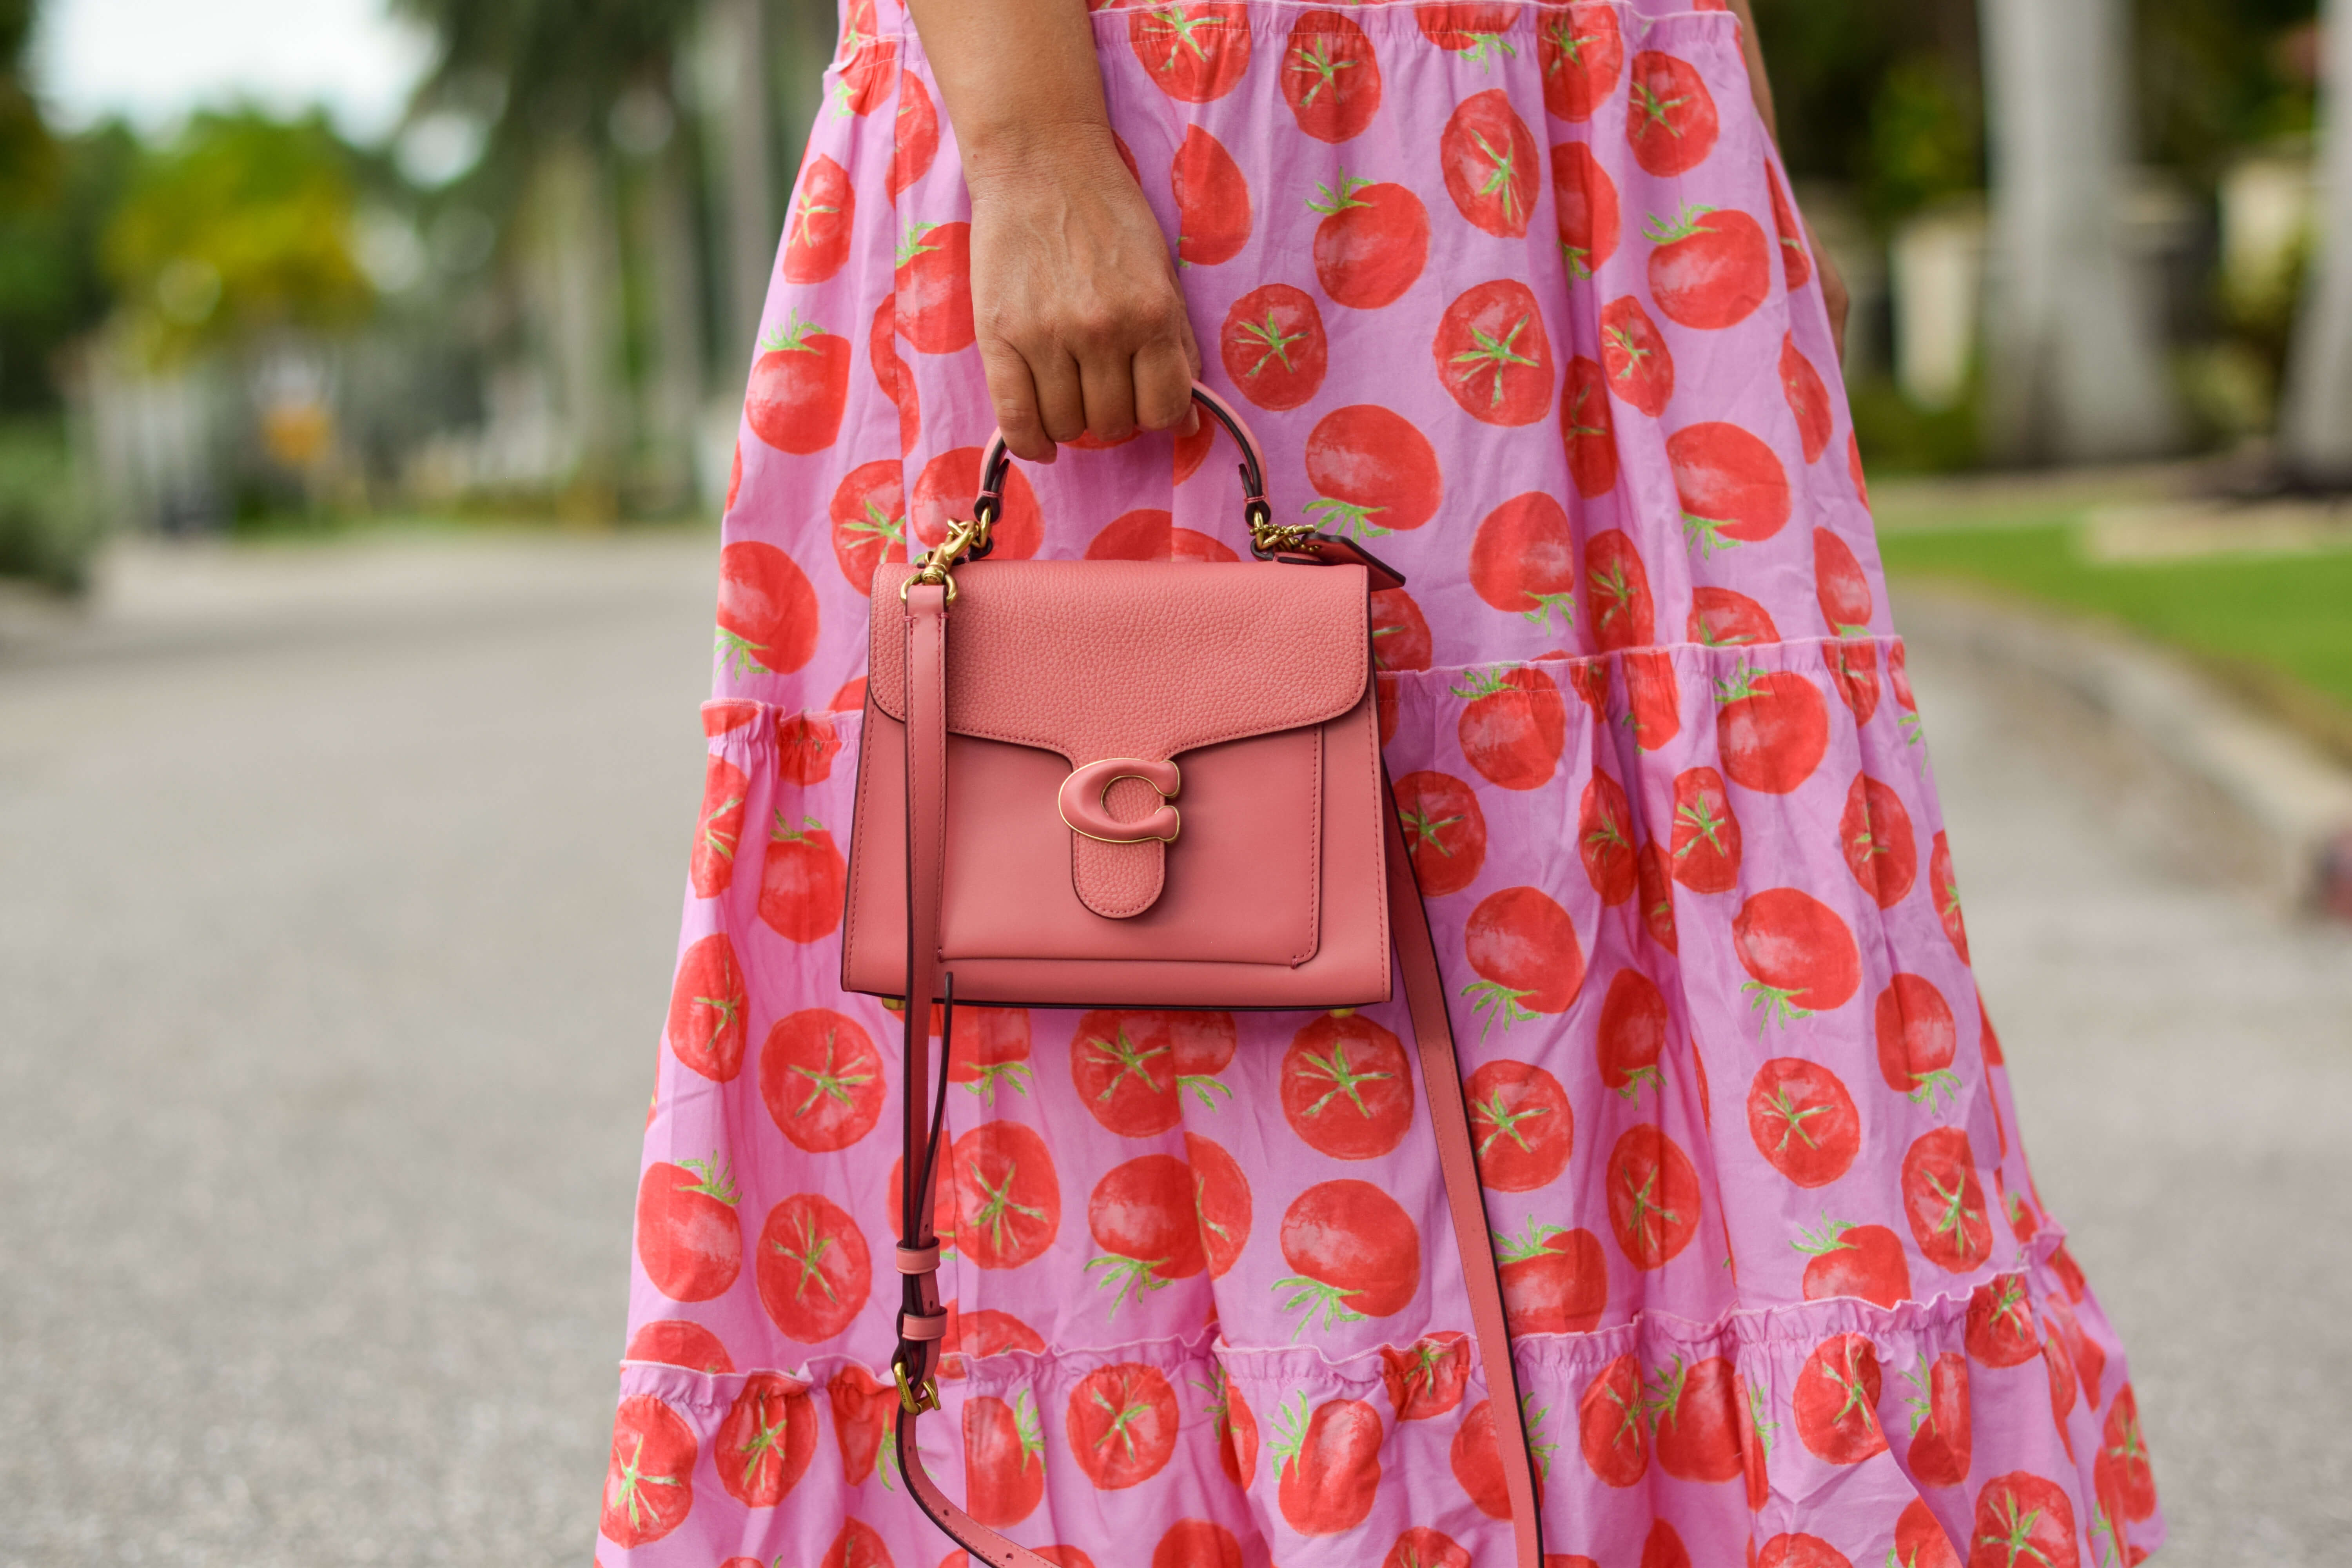 Show Me Your Mumu Spicy Tomatoes Dress Coach Bag Coclico Sandals Outfit by Modnitsa Styling